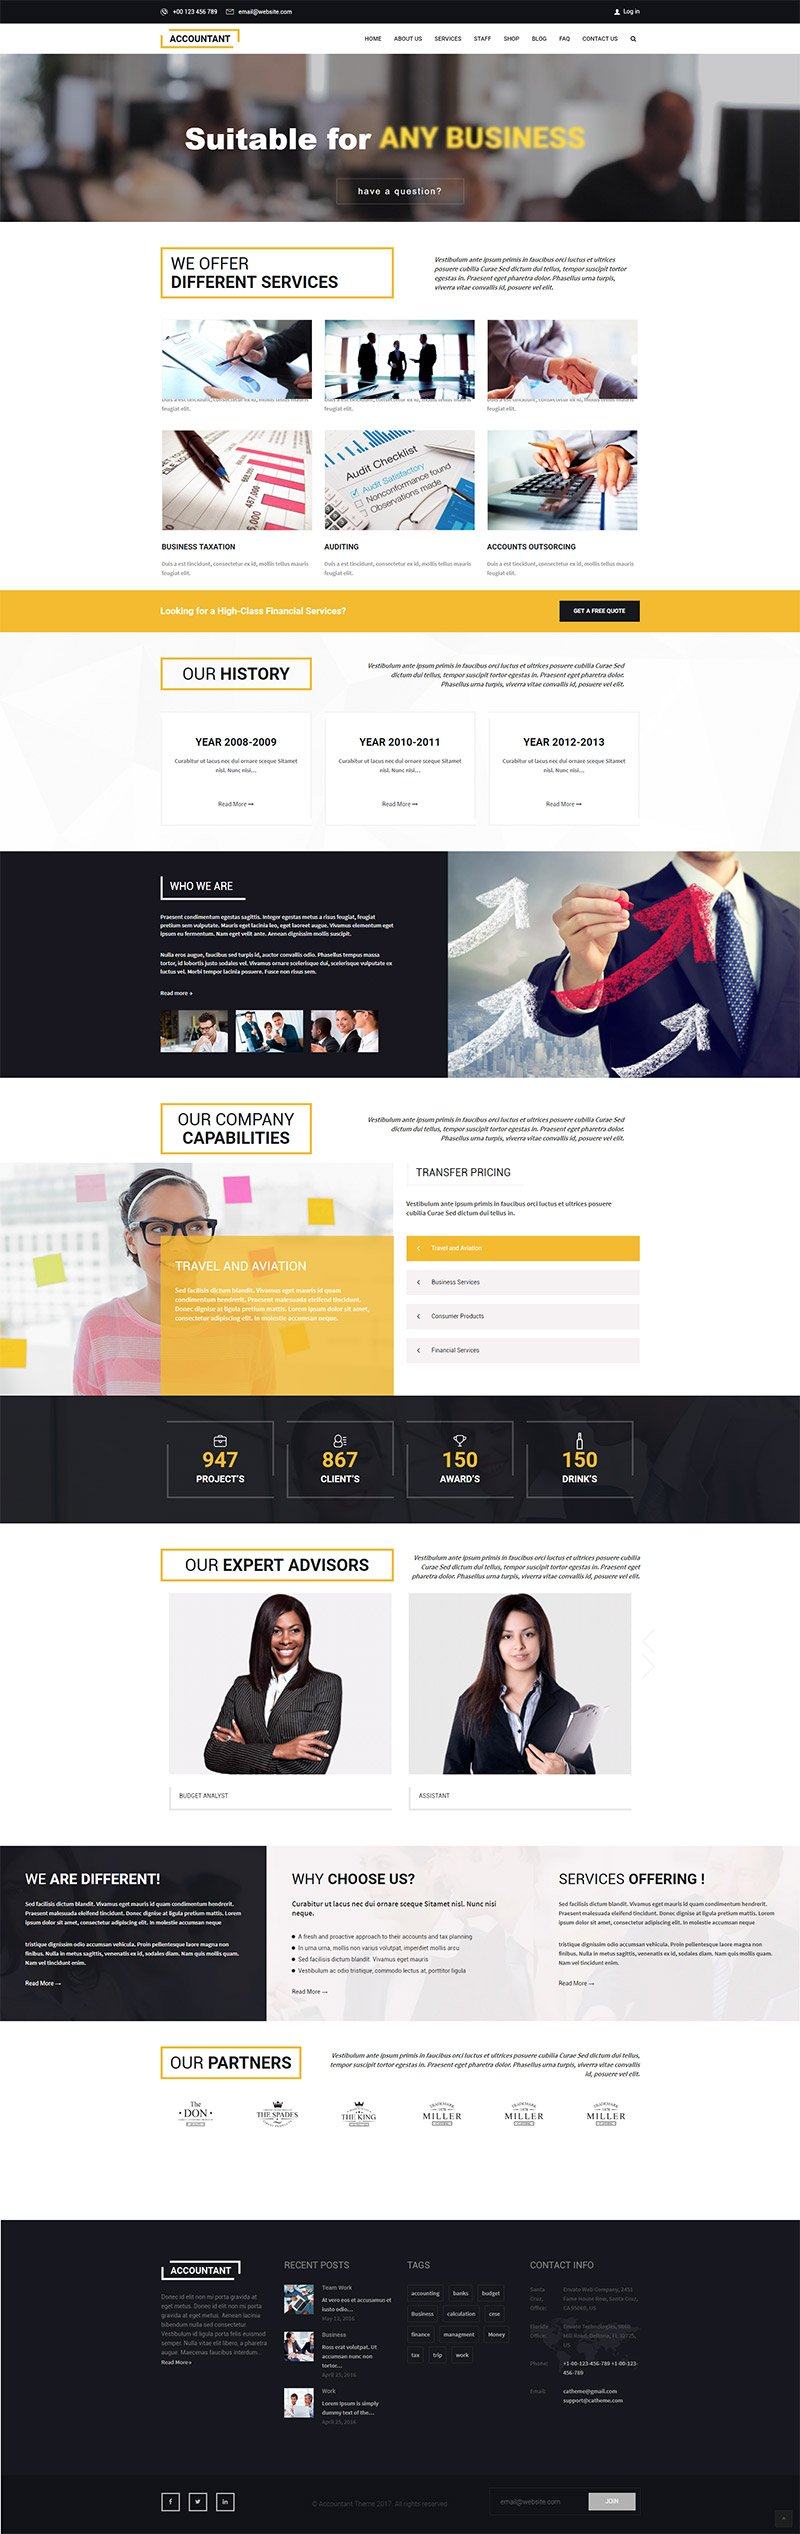 Giao diện website doanh nghiệp Accountant